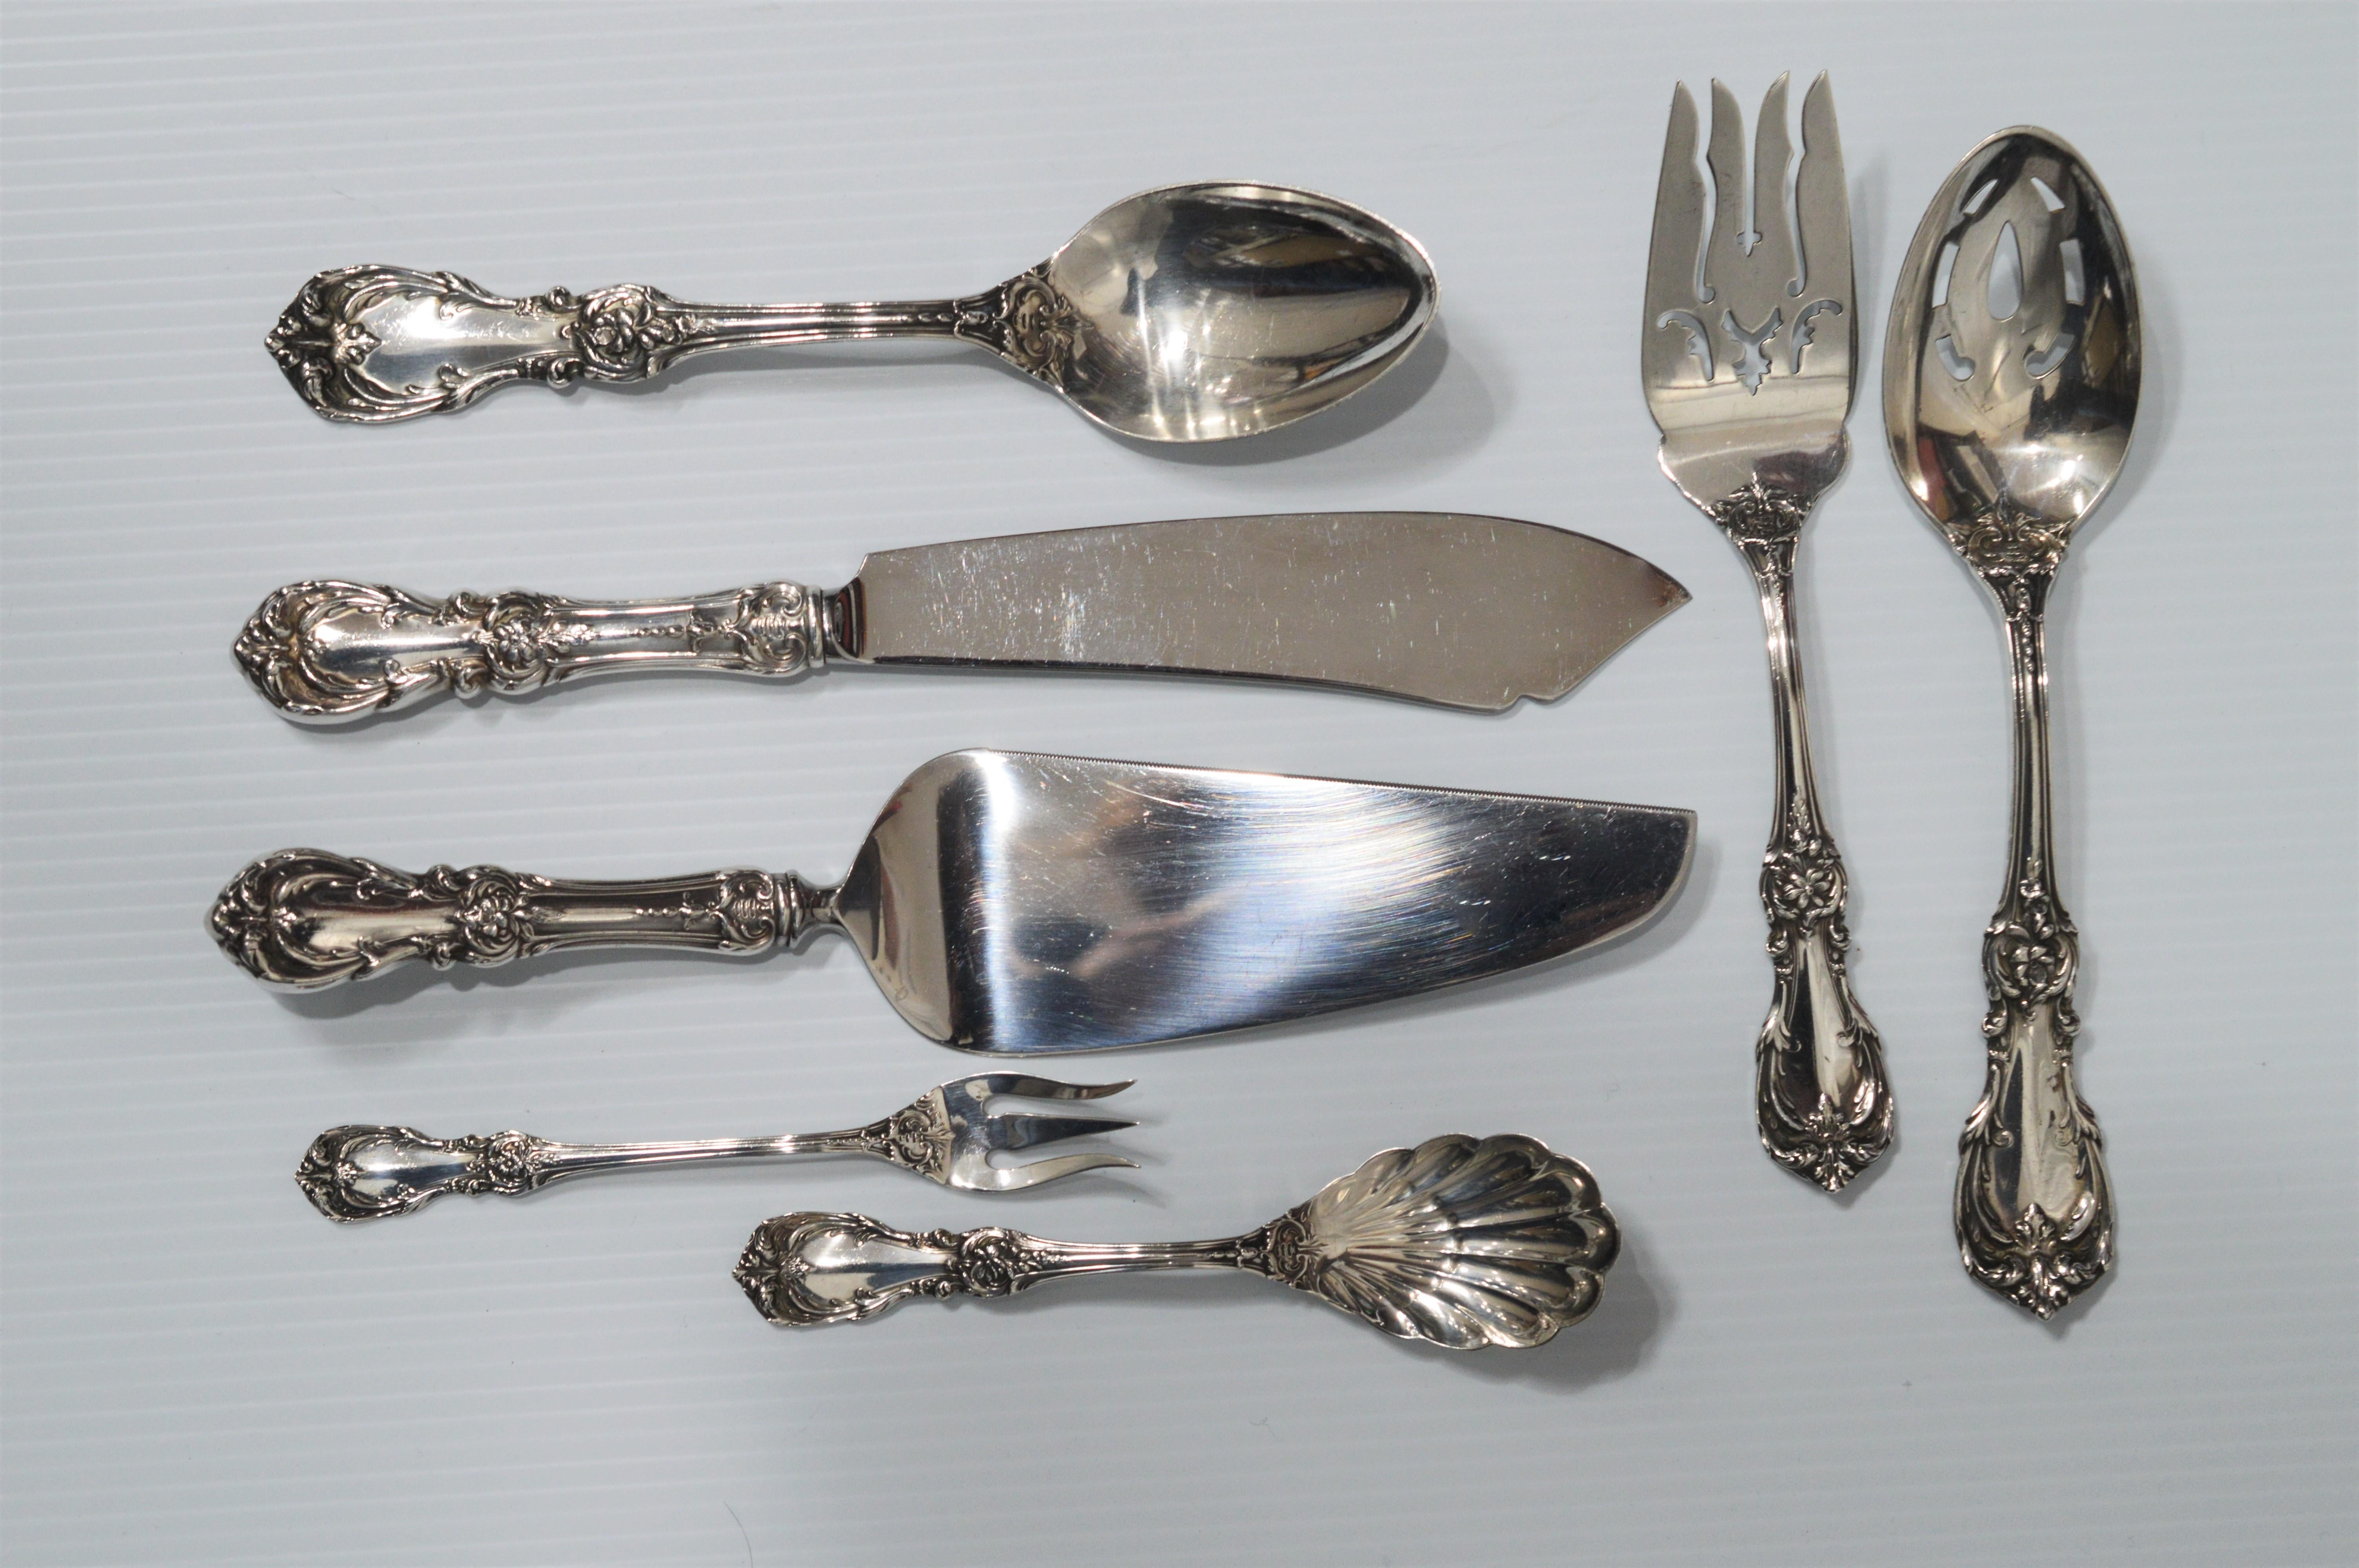 antique reed and barton silverware